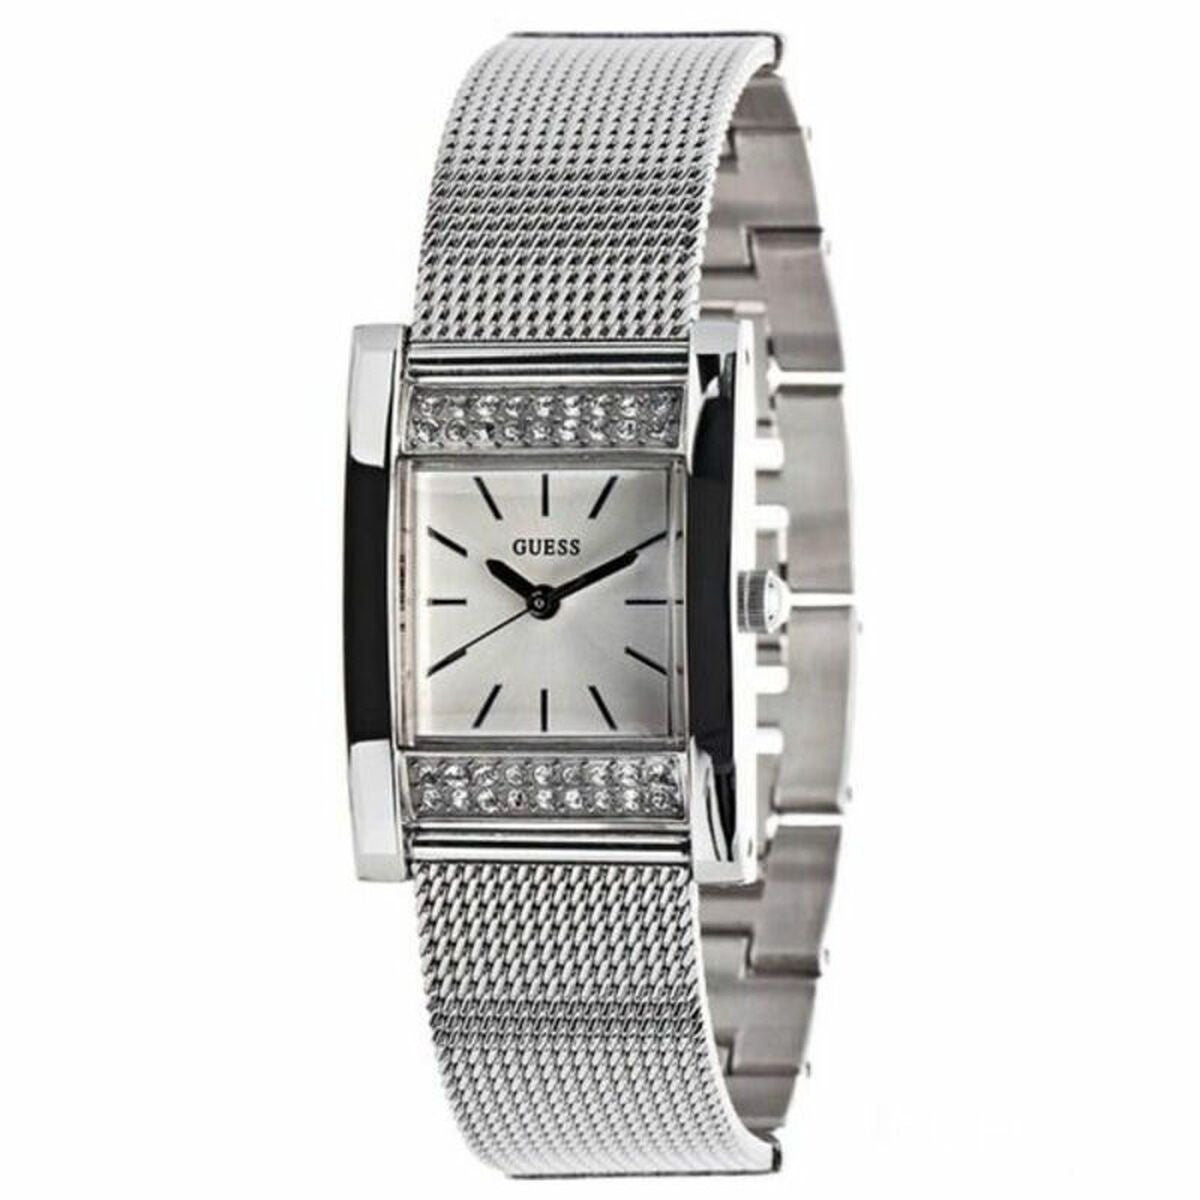 Ladies' Watch Guess W0127L1 (12 mm), Guess, Watches, Women, ladies-watch-guess-w0127l1-12-mm, Brand_Guess, category-reference-2570, category-reference-2635, category-reference-2662, category-reference-2682, category-reference-2995, category-reference-t-19667, category-reference-t-19725, Condition_NEW, fashion, original gifts, Price_50 - 100, RiotNook